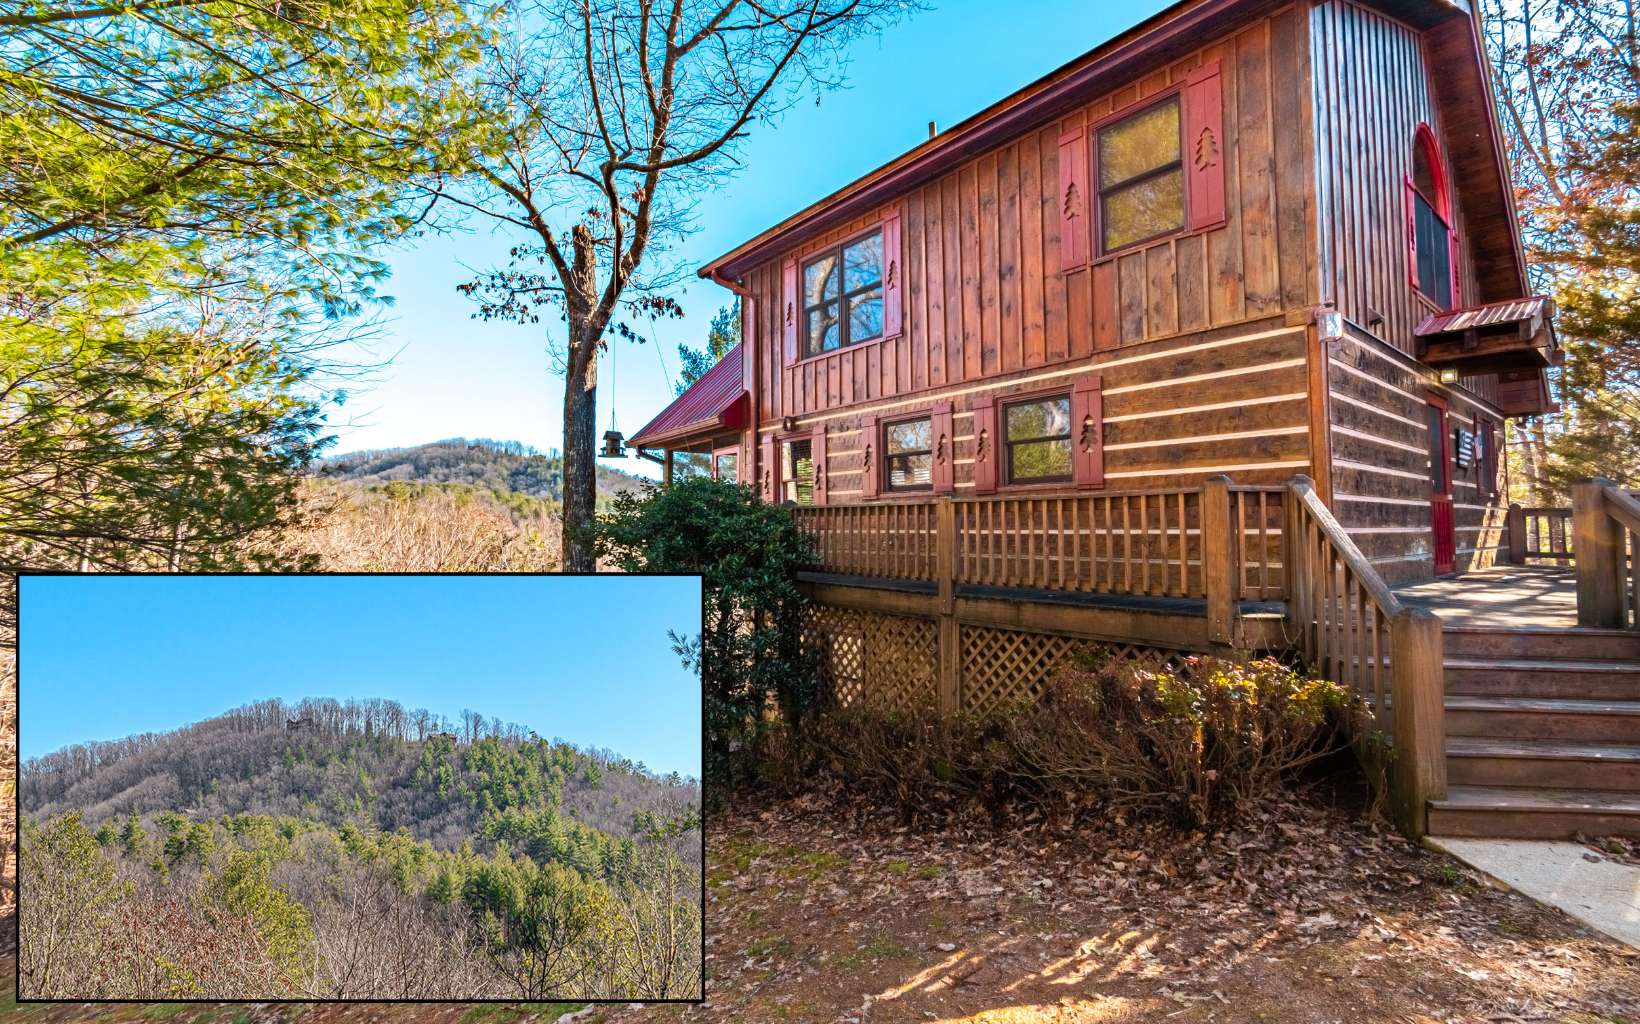 This 3BR-3BA cabin on 4.24AC with 1,960 sq. ft. PLUS it has a YEAR-ROUND MOUNTAIN VIEW and ALL PAVED ROAD ACCESS. Sit on your back porch, and breathe in the crisp, fresh mountain air while you take in the awesome views. This cabin has a fully fenced-in flat area with grass in the backyard for your four-legged friends, a full basement, and a main floor master. Lots of unique custom features - Thomasville cabinets in kitchen w/corian counters, a built-in murphy bed, a gas fireplace in the wall, a hidden mechanical and tool room, and a custom pantry with cool sliding shelves! Close to hiking, fishing, USFS, rafting, and all that the beautiful North GA Mountains has to offer. This would make an excellent rental or full-time home as it is only 15 minutes from Blue Ridge, and only 20 minutes to Murphy, NC. Furnishings NOT included.